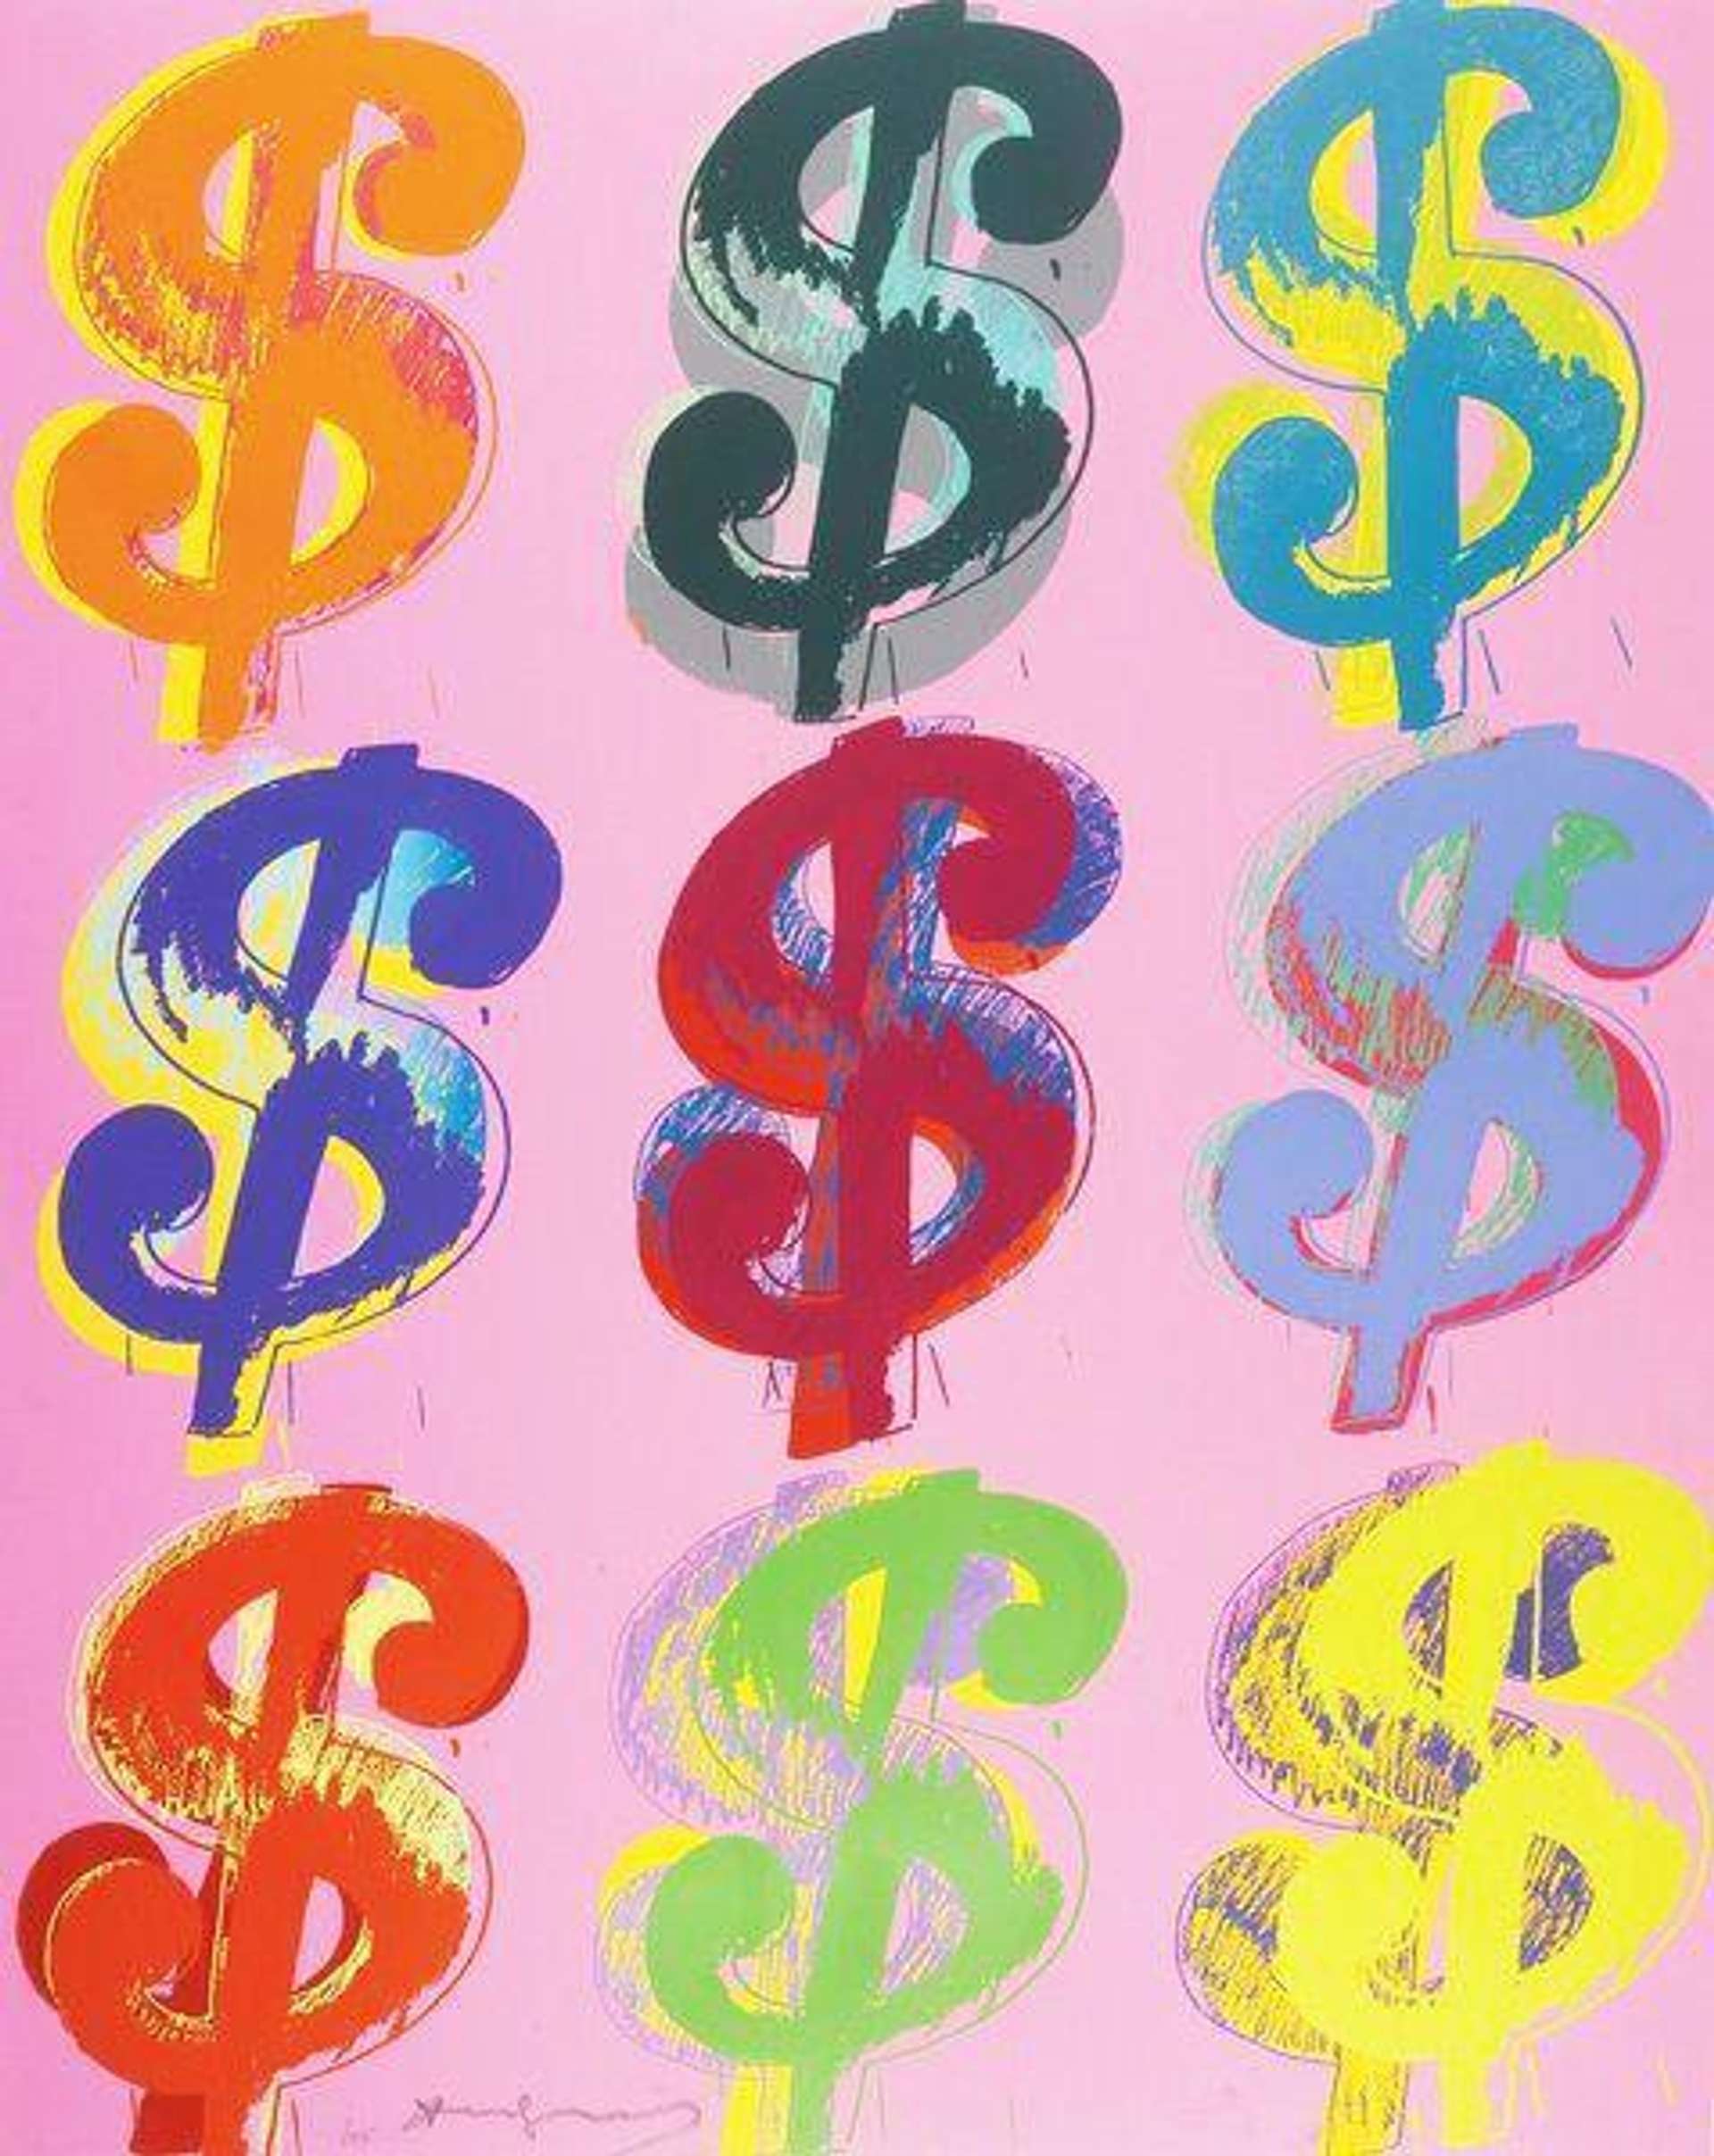 Dollar Sign 9 (F. & S. II.285) by Andy Warhol 